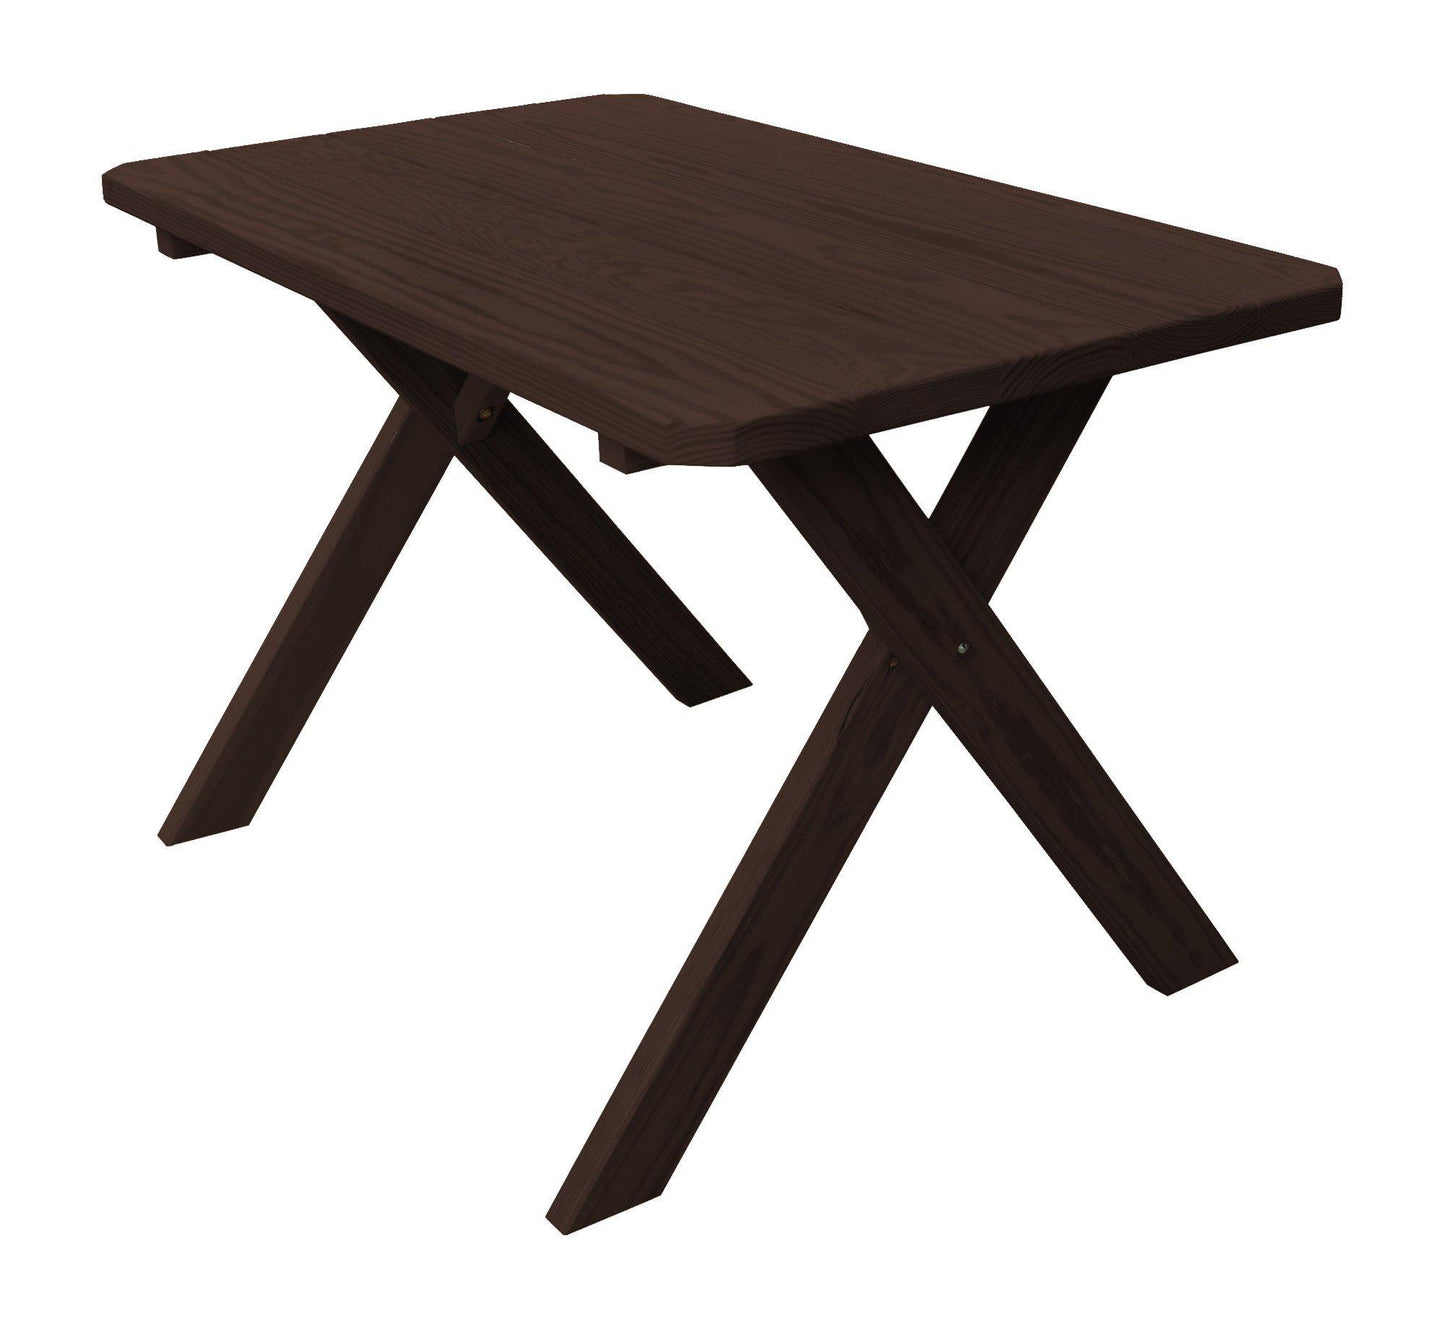 A&L Furniture Co. Pressure Treated Pine 44" Cross-leg Table Only - LEAD TIME TO SHIP 10 BUSINESS DAYS